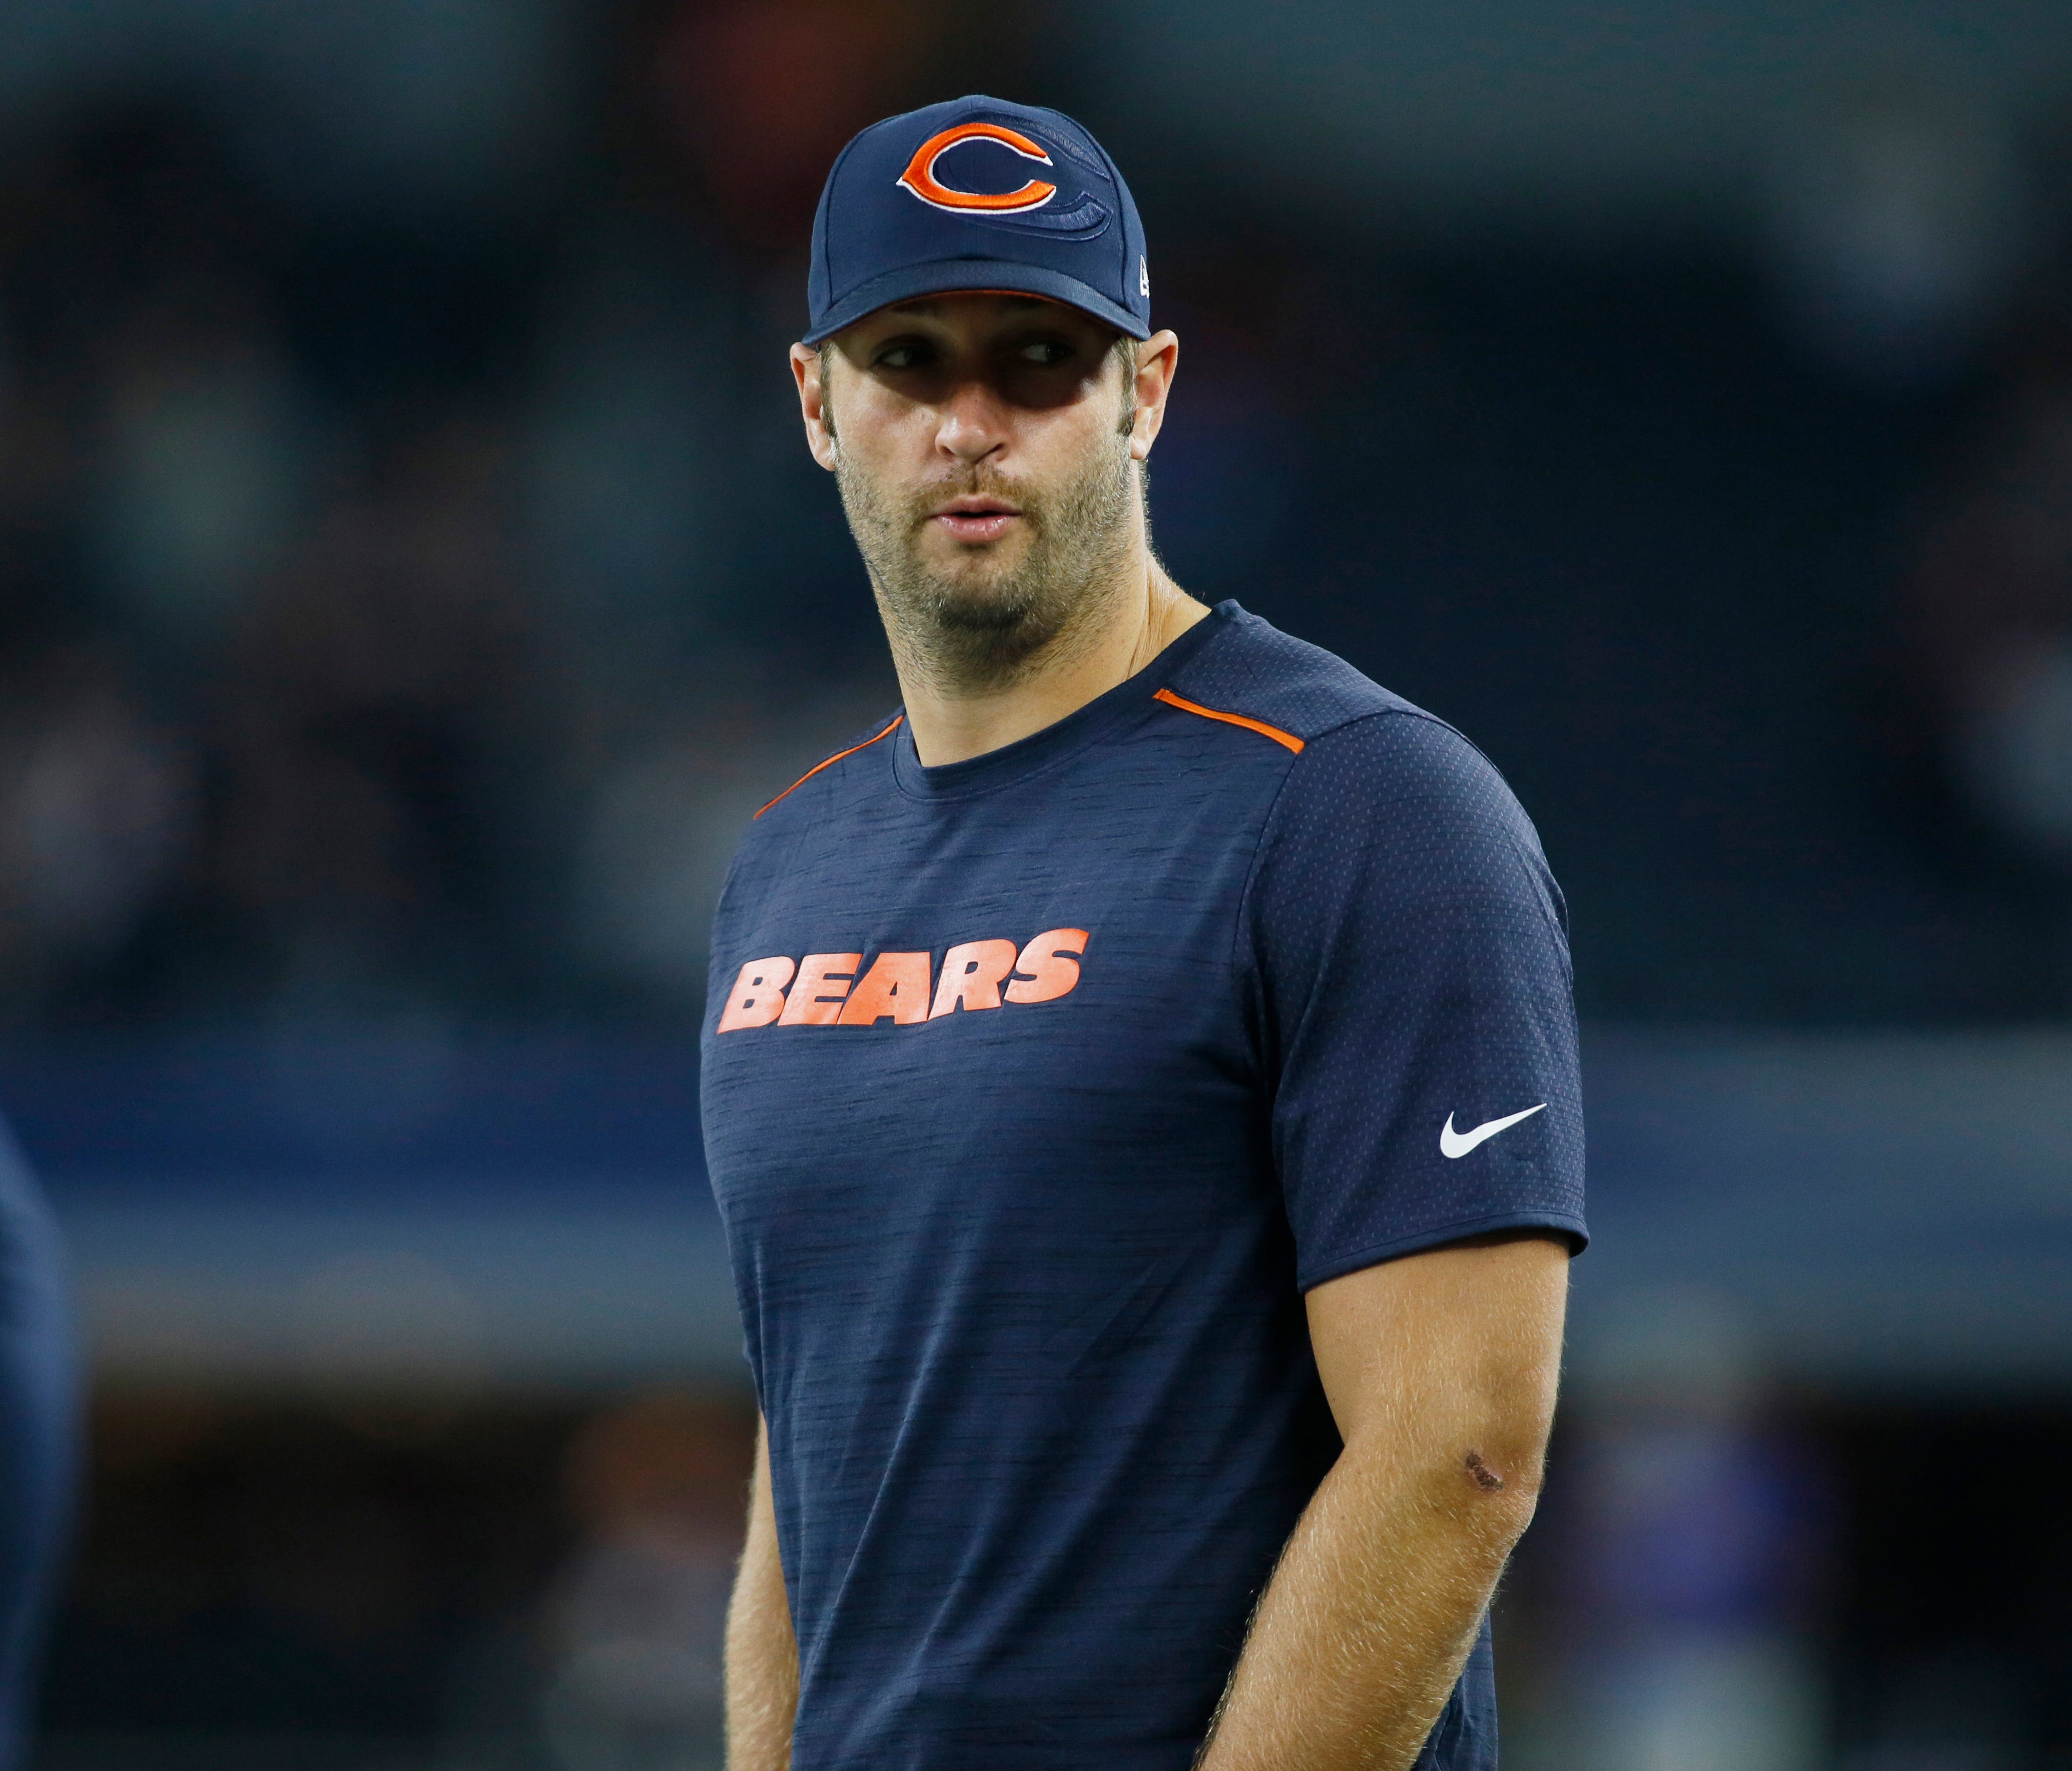 Chicago Bears quarterback Jay Cutler on the field before the game against the Dallas Cowboys at AT&T Stadium.